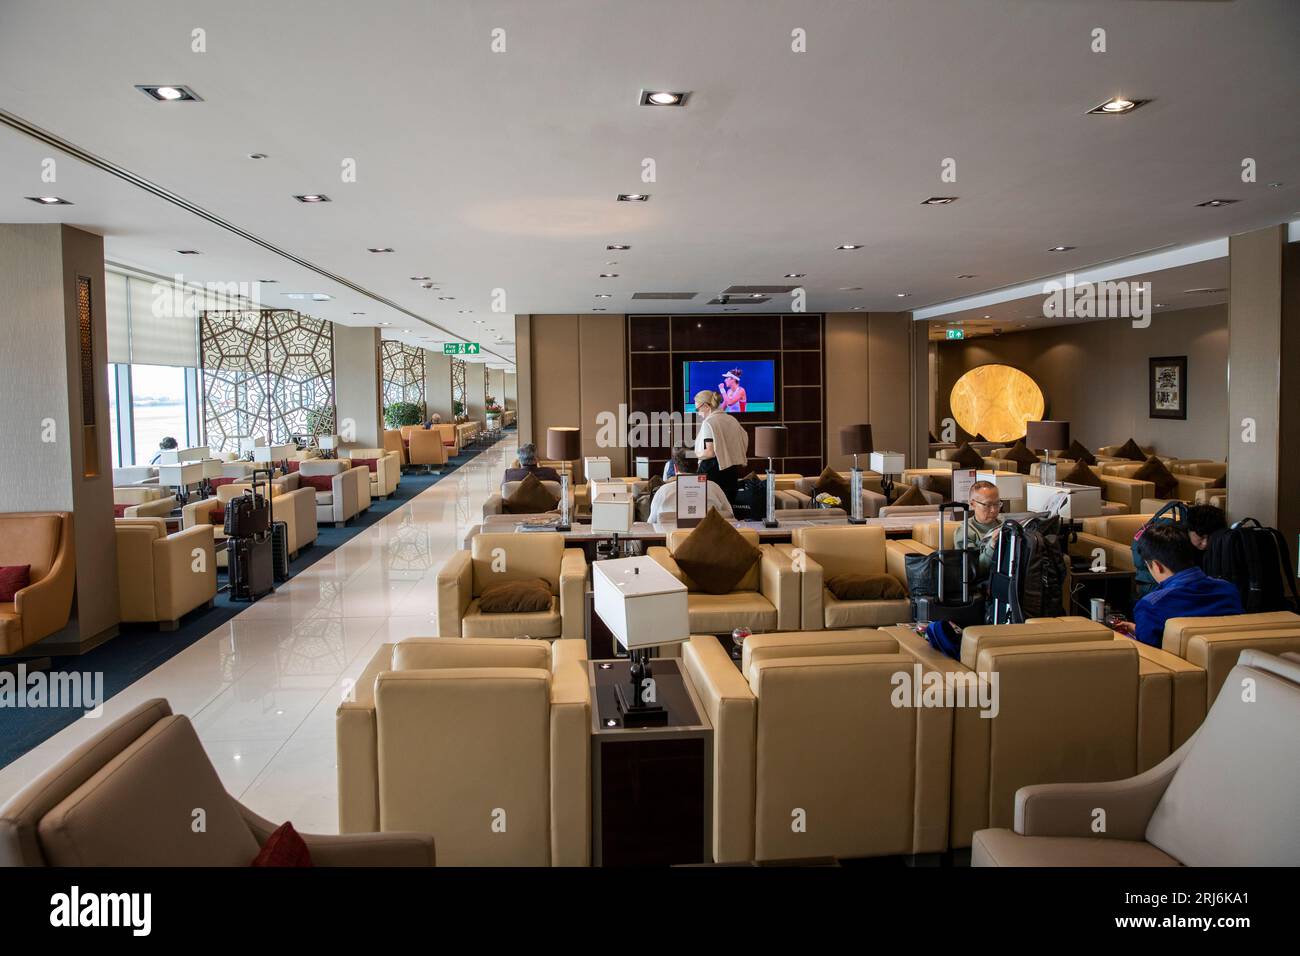 UK, England, London Heathrow Airport, Emirates Business Class passengers relaxing in Lounge Stock Photo